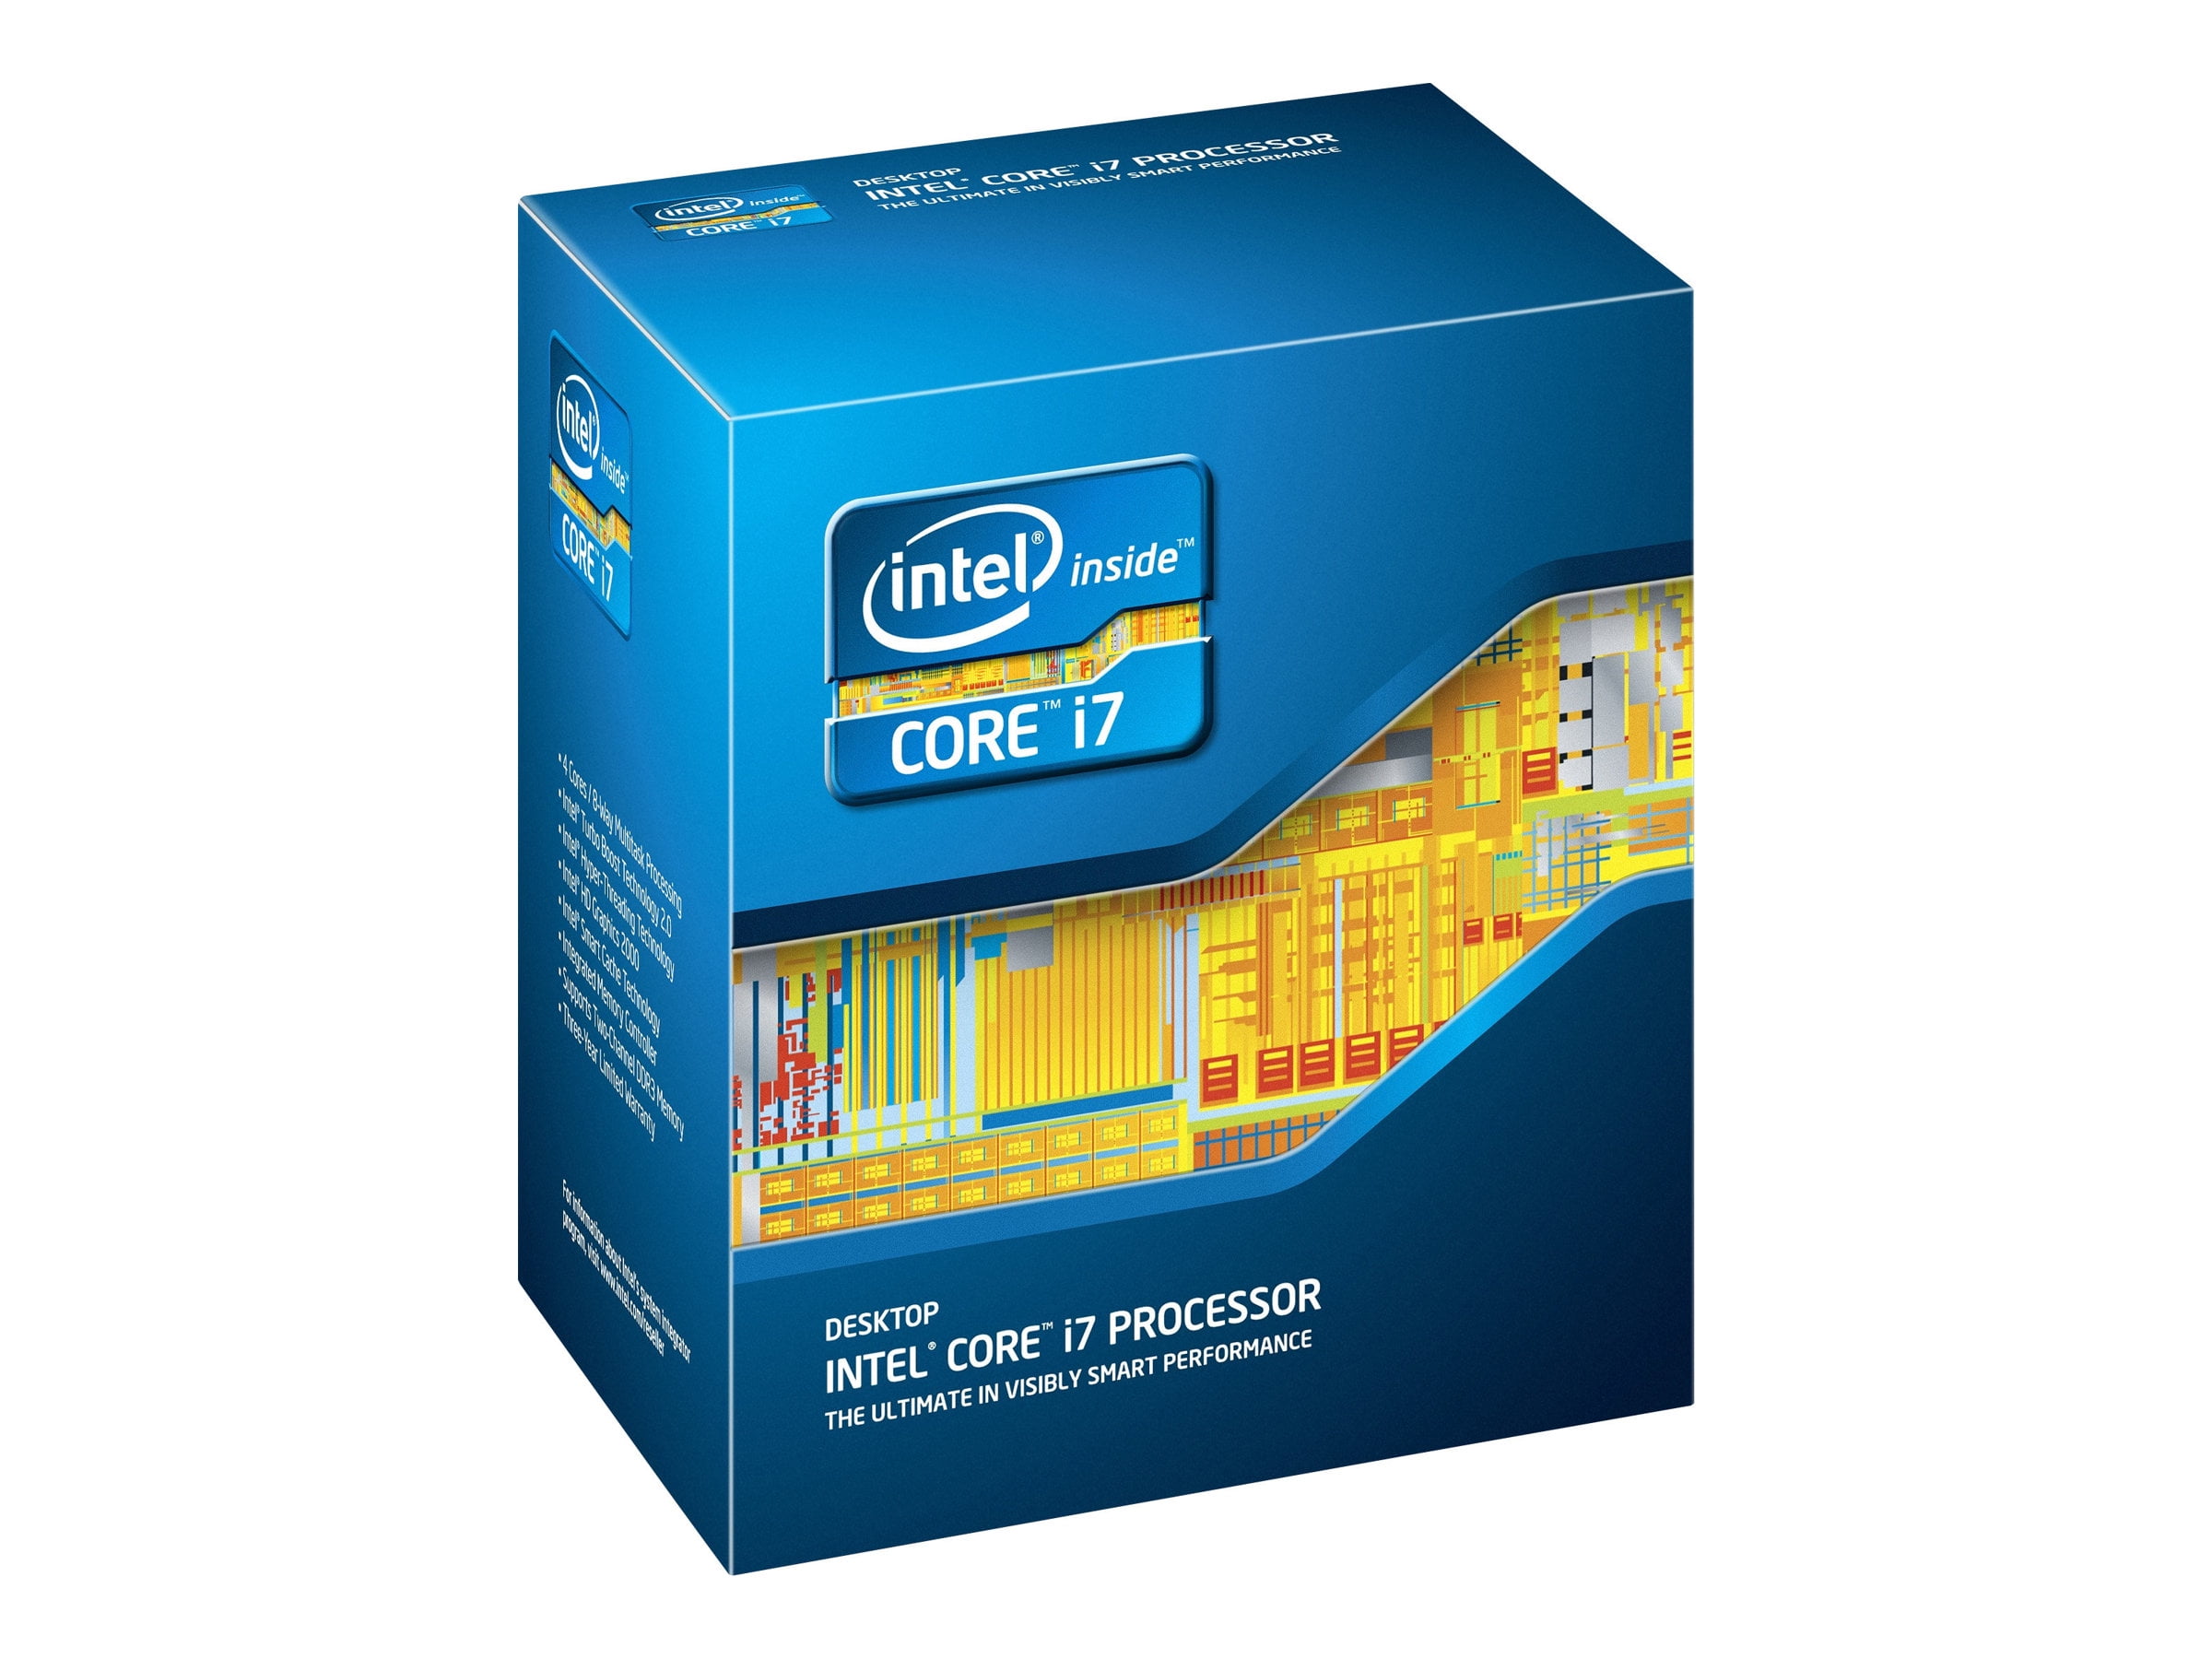 Intel Core i7 4770K - 3.5 GHz - 4 cores - 8 threads - 8 MB cache